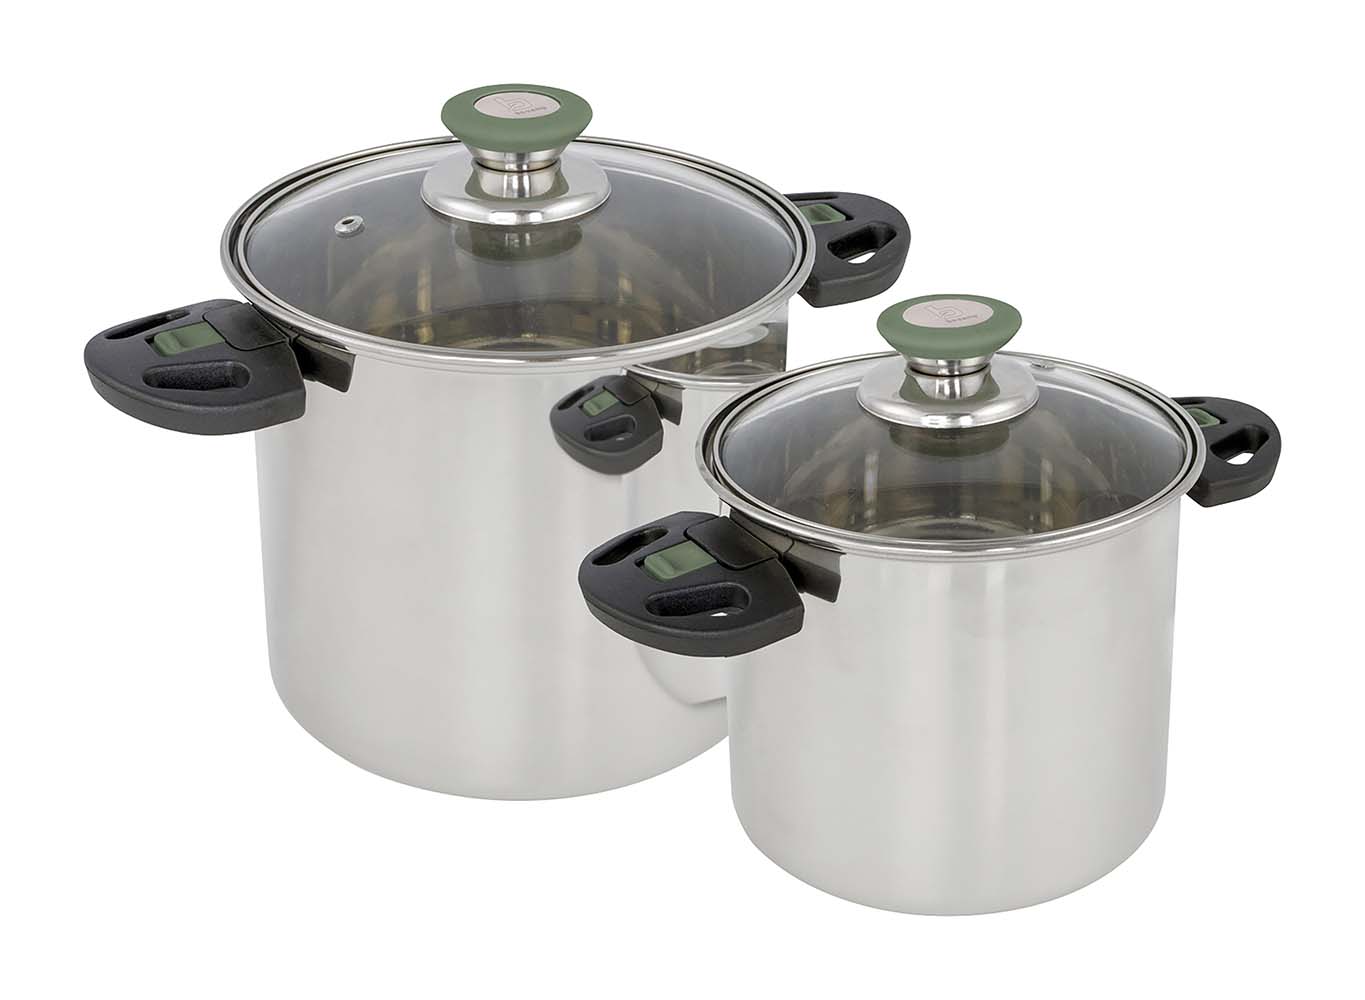 2100930 A luxurious 2-part stainless steel cookware set. Every pan has a glass lid with heat-resistant knob. In addition, every pan has heat-resistant and retractable hand grips. These hand grips can be easily folded after use so that the pans are fully nestable and compact to store. Save up to 40% space! The pans are narrow and high and thereby extremely suitable for the limited space on gas burners Can be used on gas, ceramic and electrical heat sources. Dimensions (Øxh): 14x13 and 18x17 cm. Dimensions nested (Øxh): 18x17 cm. Contents: 2 and 4.3 litre.